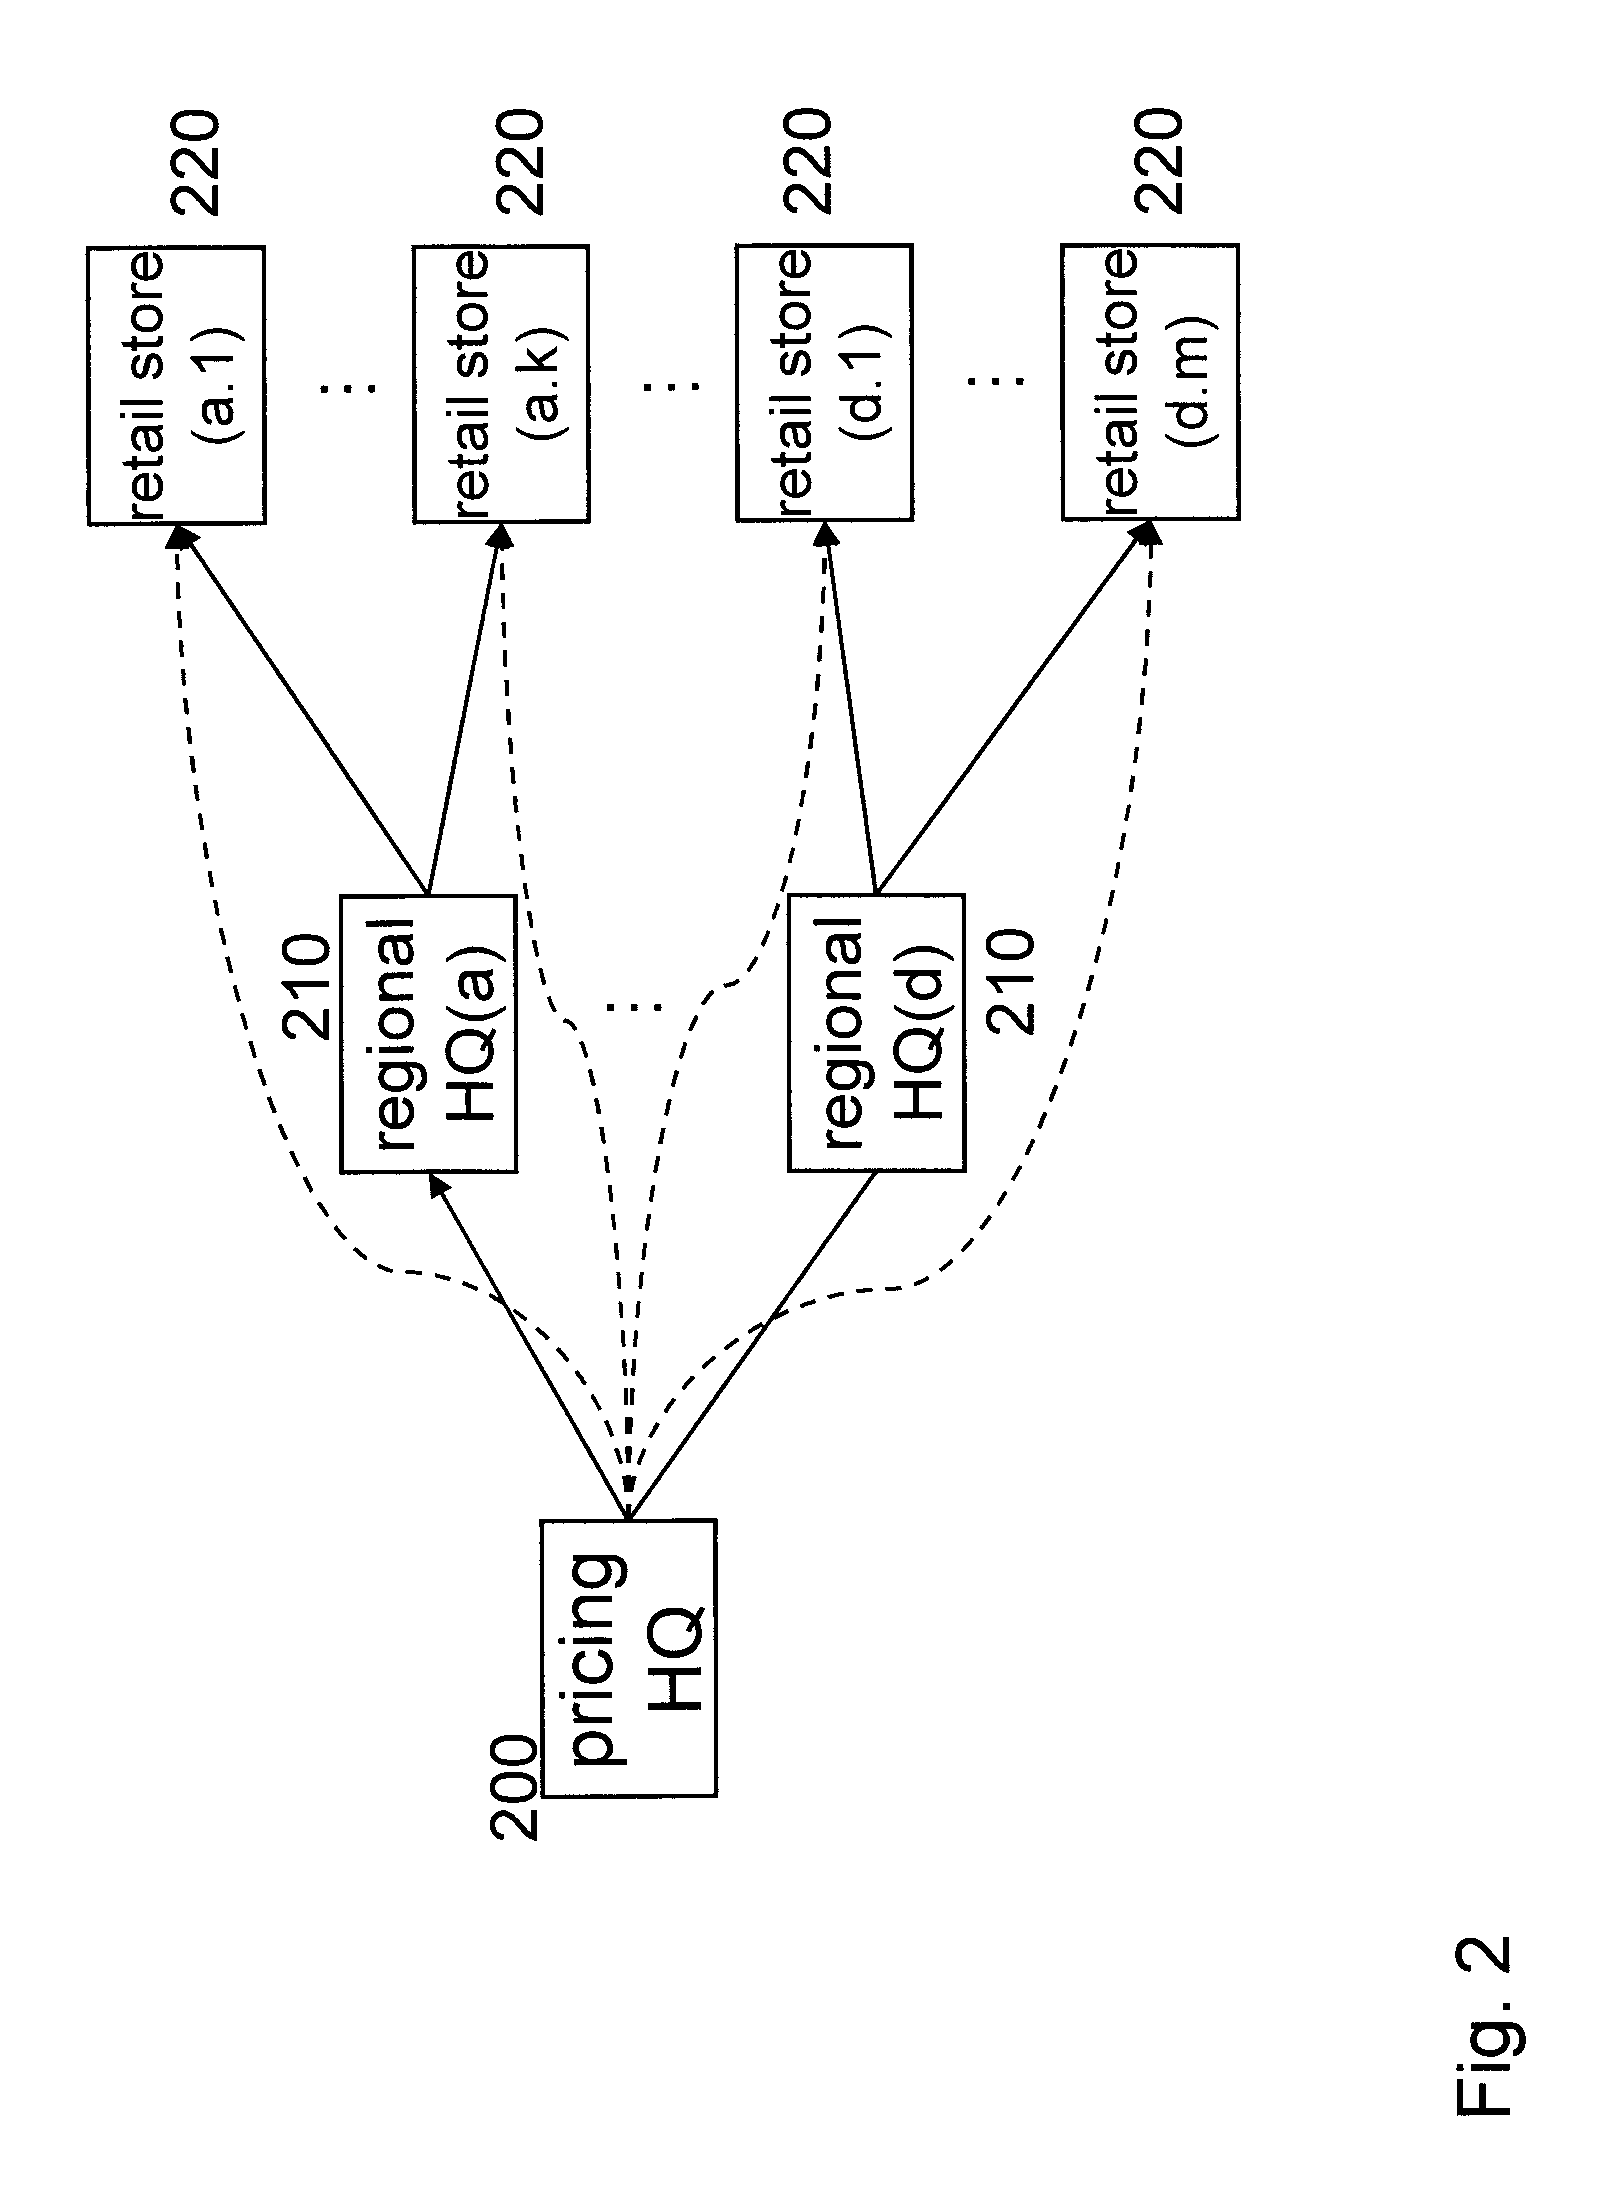 Method for automatic optimized price display